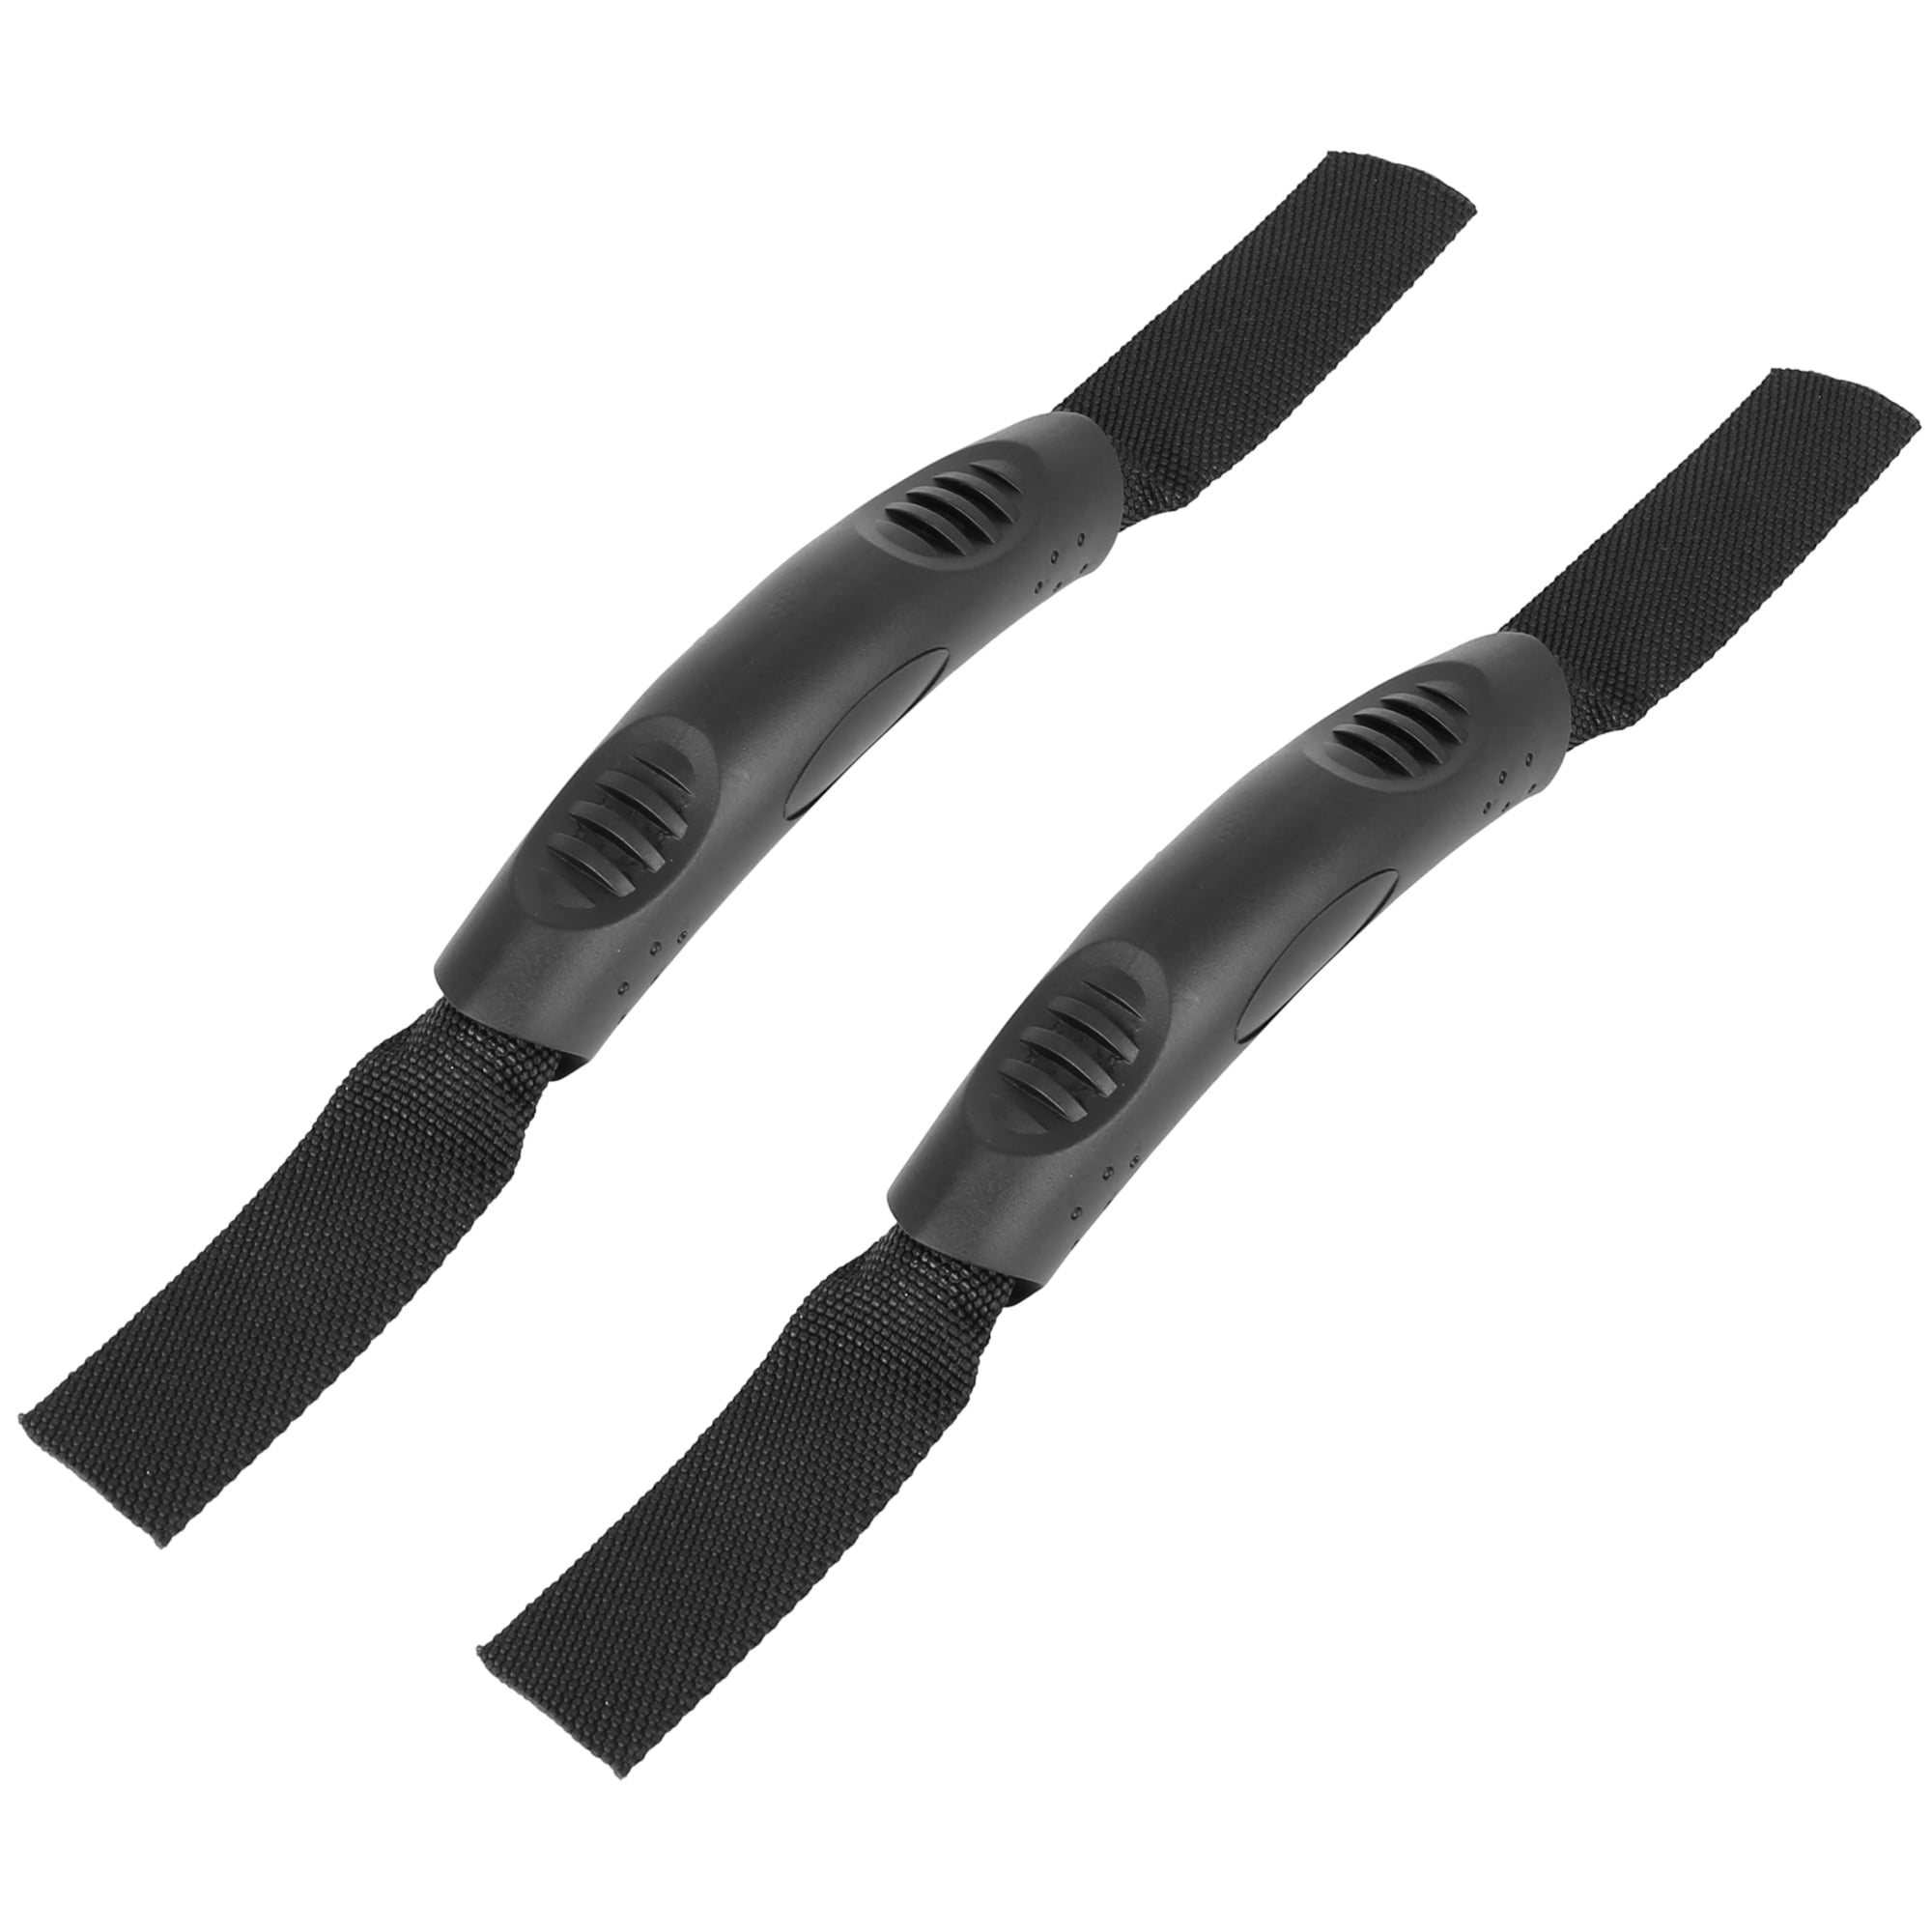 Rubber Boat Handle Luggage Side Mount Carry Handles for Kayak Canoe Boat 2pcs 